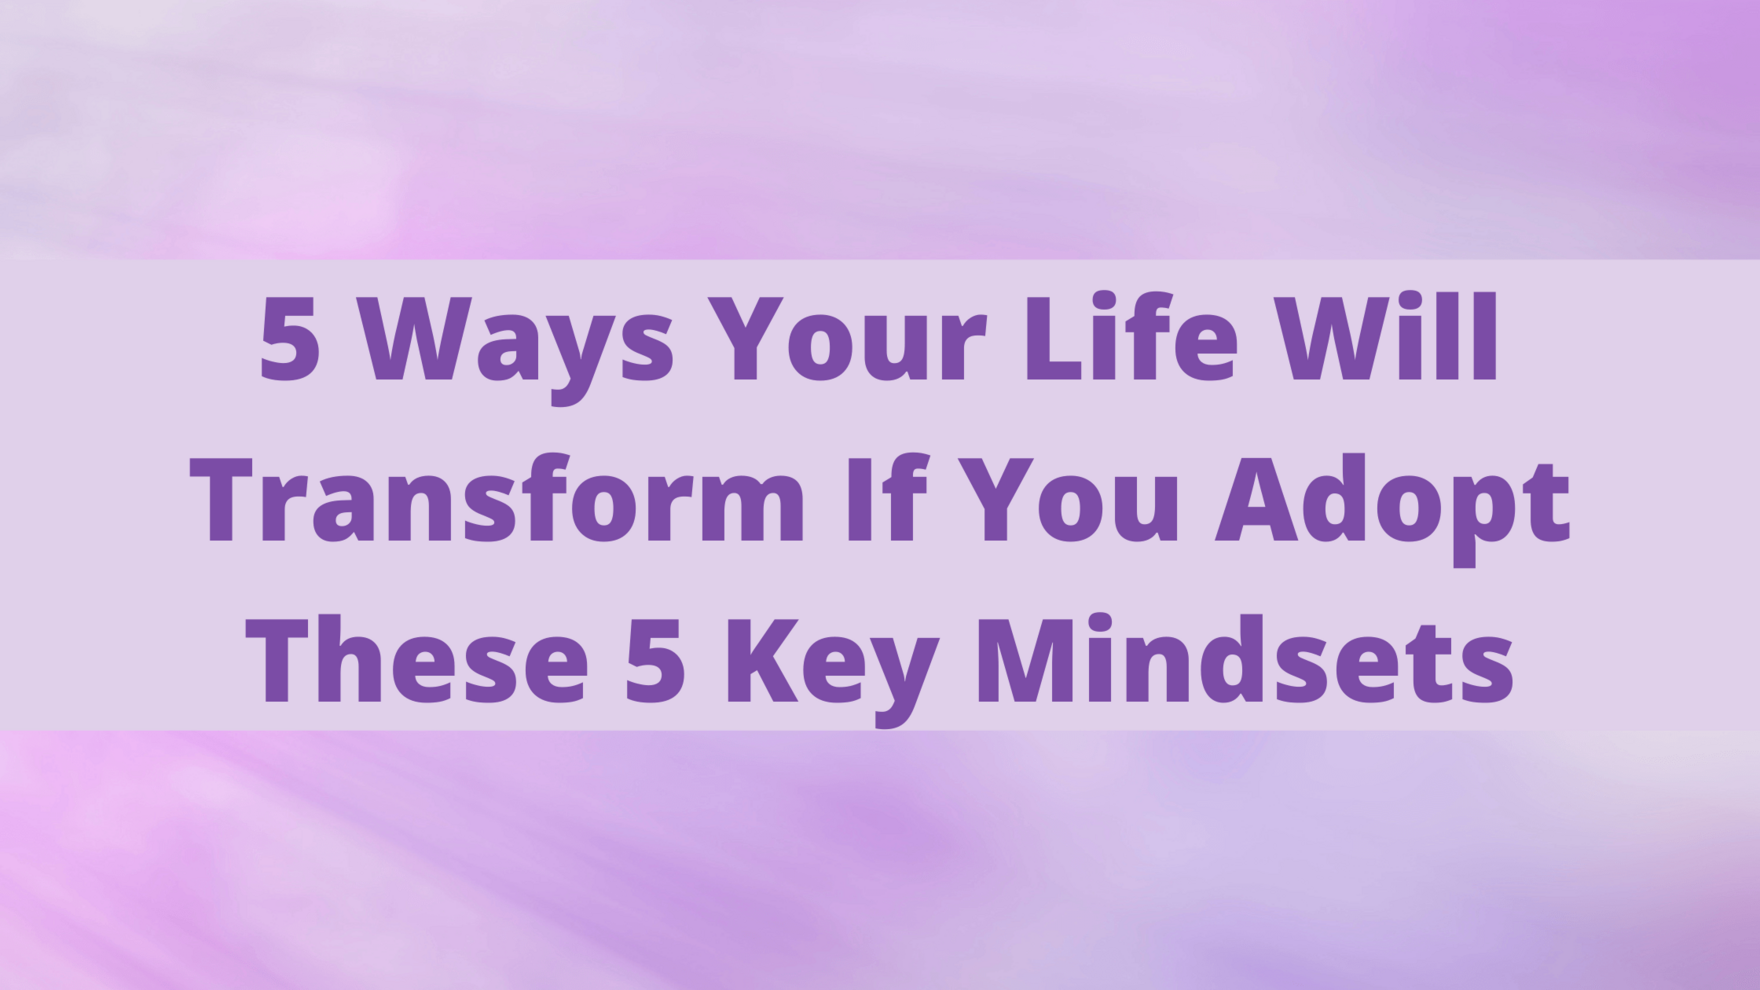 Business Mindset Blog - 5 Ways Your Life Will Transform If You Adopt The 5 Key Mindsets